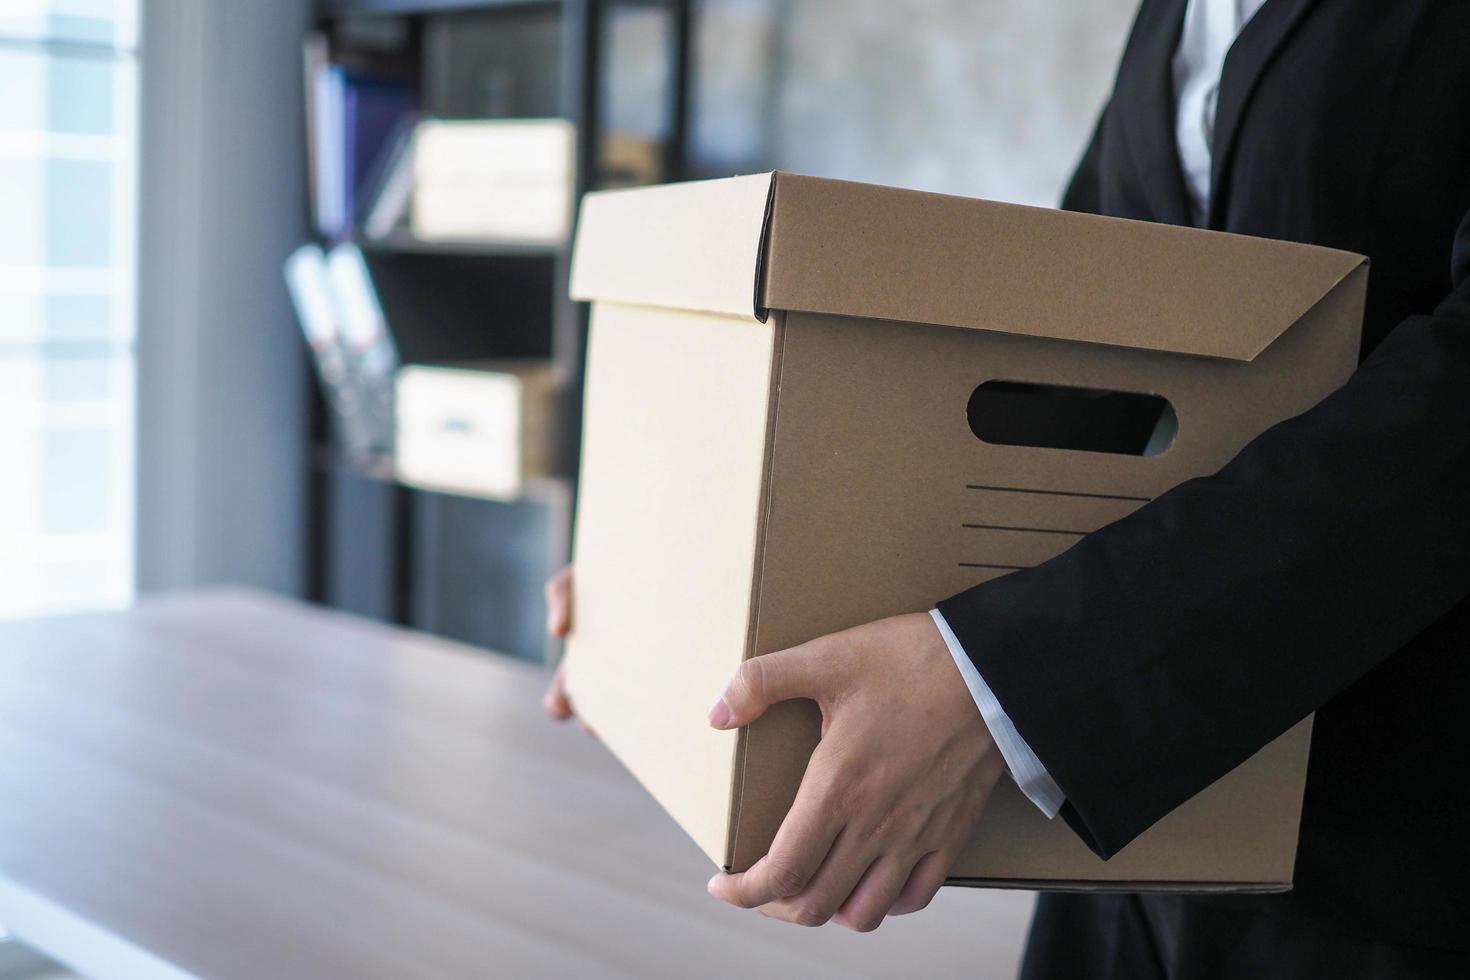 Business people walking and carrying things contain personal items for the job, change brown cardboard boxes, unemployment or resignation ideas photo